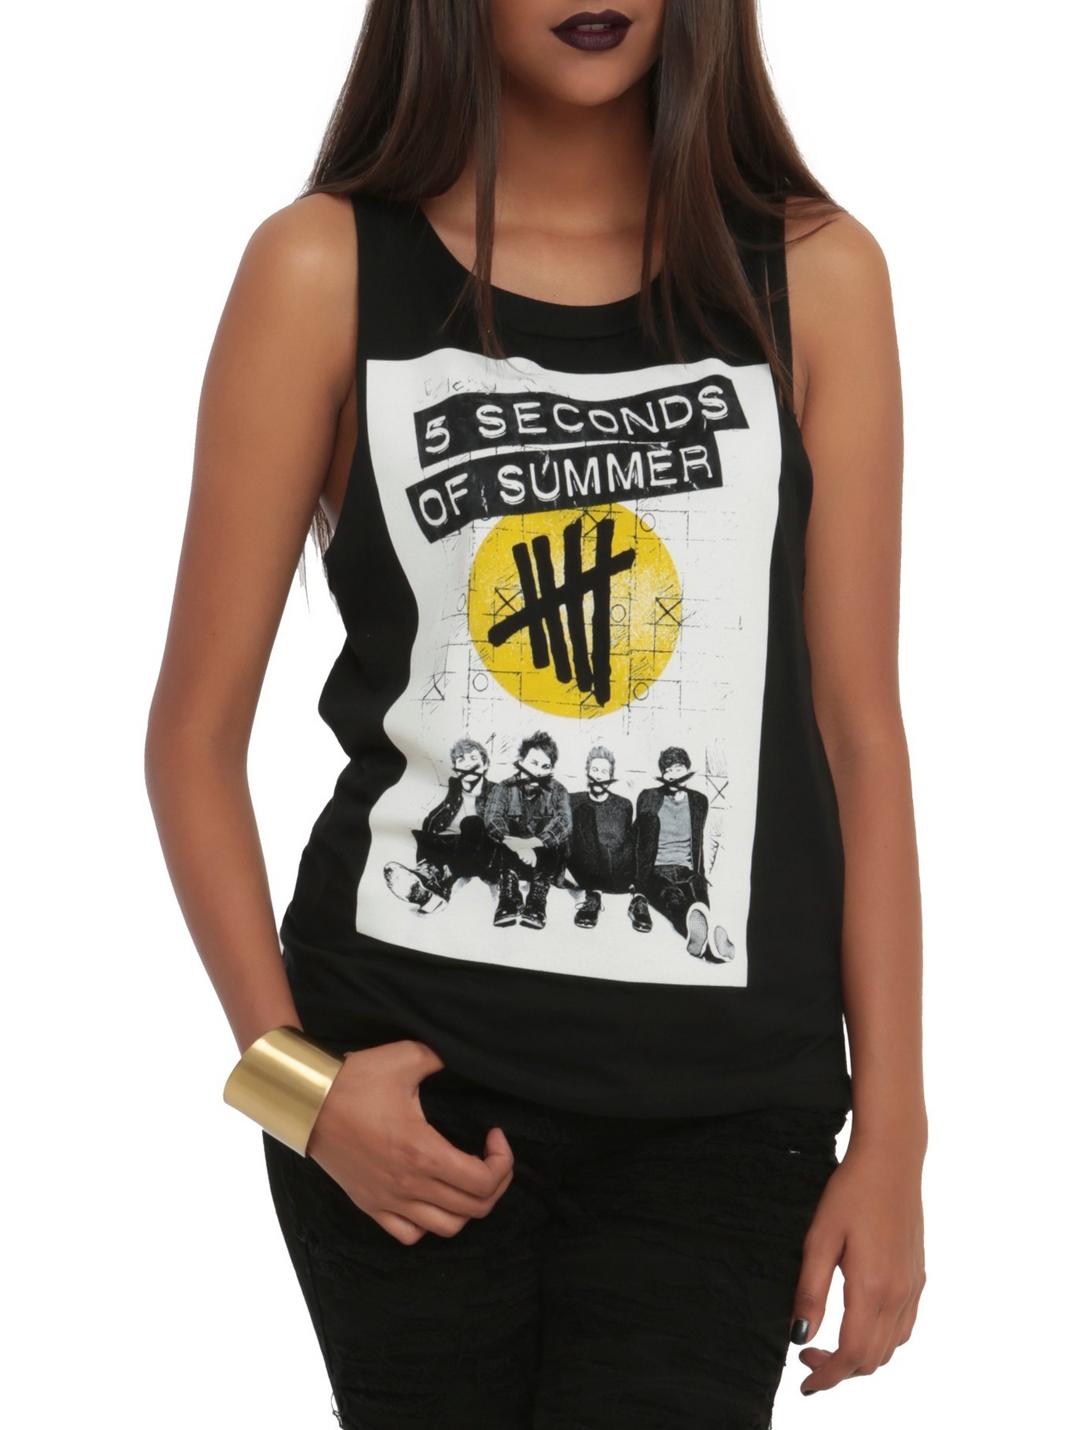 5 Seconds Of Summer XO Photo Girls Muscle Top, BLACK, hi-res